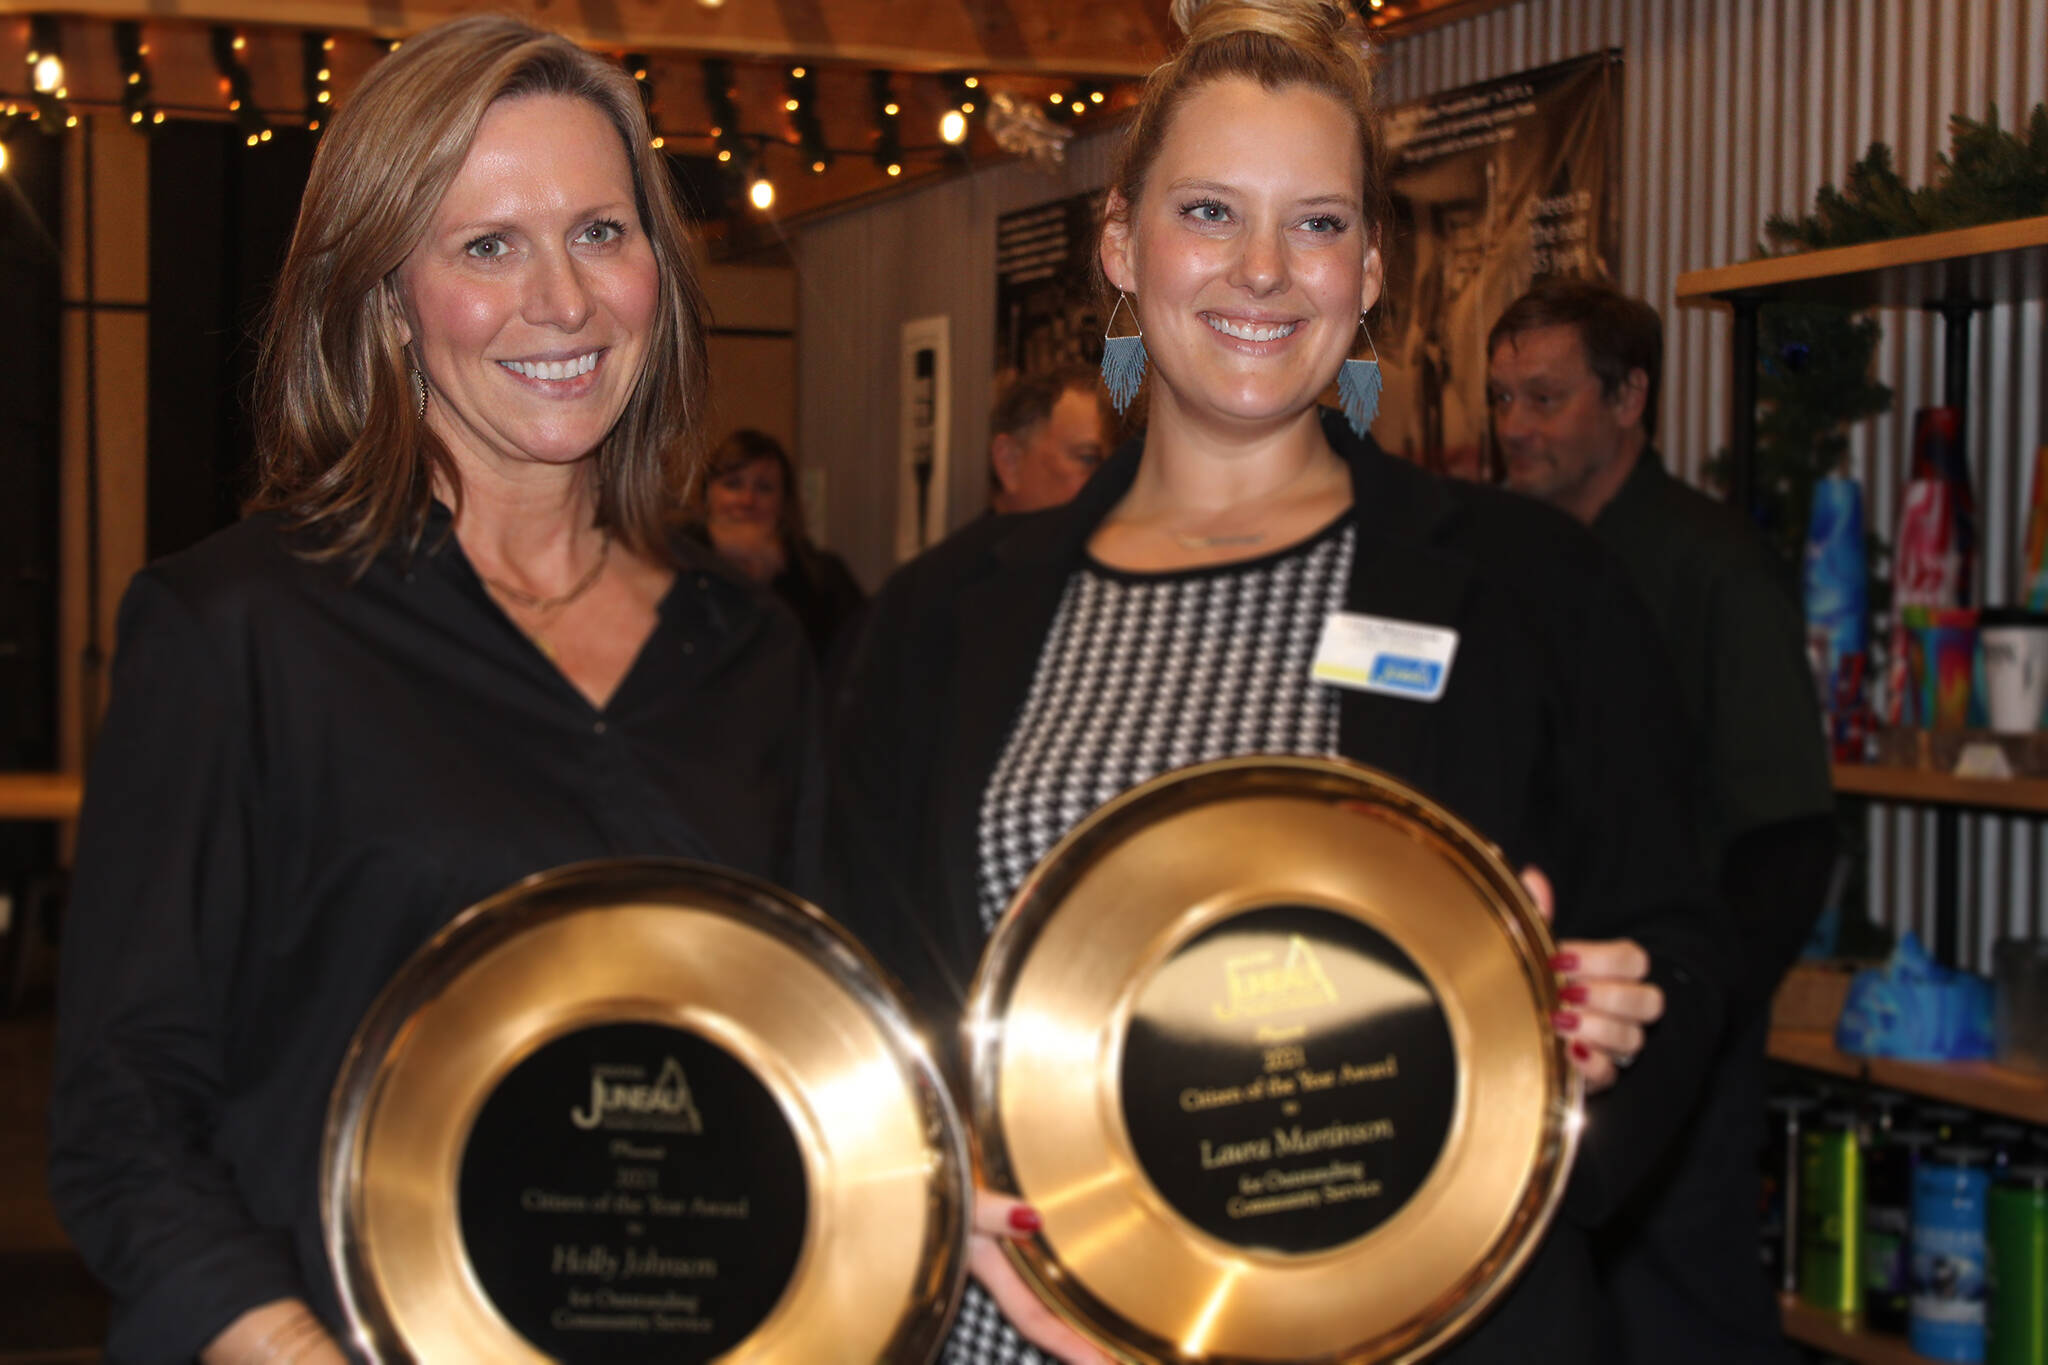 Holly Johnson, left, and Laura Martinson were named Juneau’s Citizens of the year on Thursday night. Martinson, who owns Caribou Crossings, and Johnson, president of Wings Airways, received the award in recognition of their leadership of the Protect Juneau’s Future committee. (Dana Zigmund/Juneau Empire)